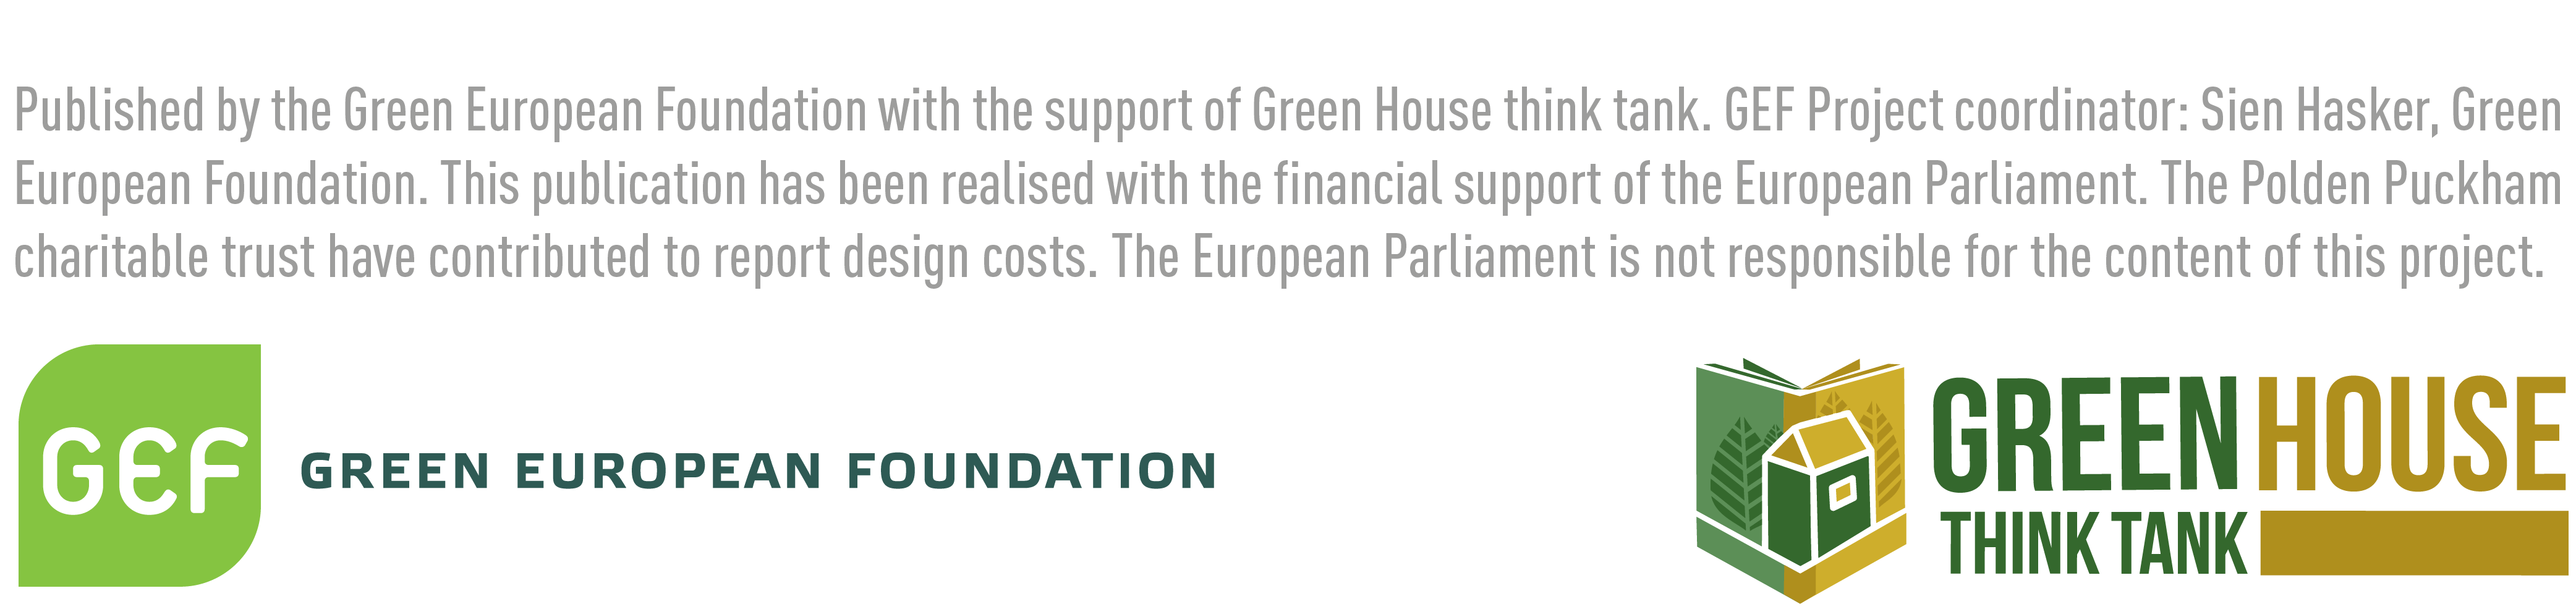 Images of the logos of the Green European Foundation and Green House Think Tank and text which reads Published by the Green European Foundation with the support of Green House think tank. GEF project coordinator: Sian Hasker, Green European Foundation. This publication has been realised with financial support of the European parliament. The Polden Puckham charitable trust have contributed to the report design costs. The European Parliament is not responsible for the content of this project.